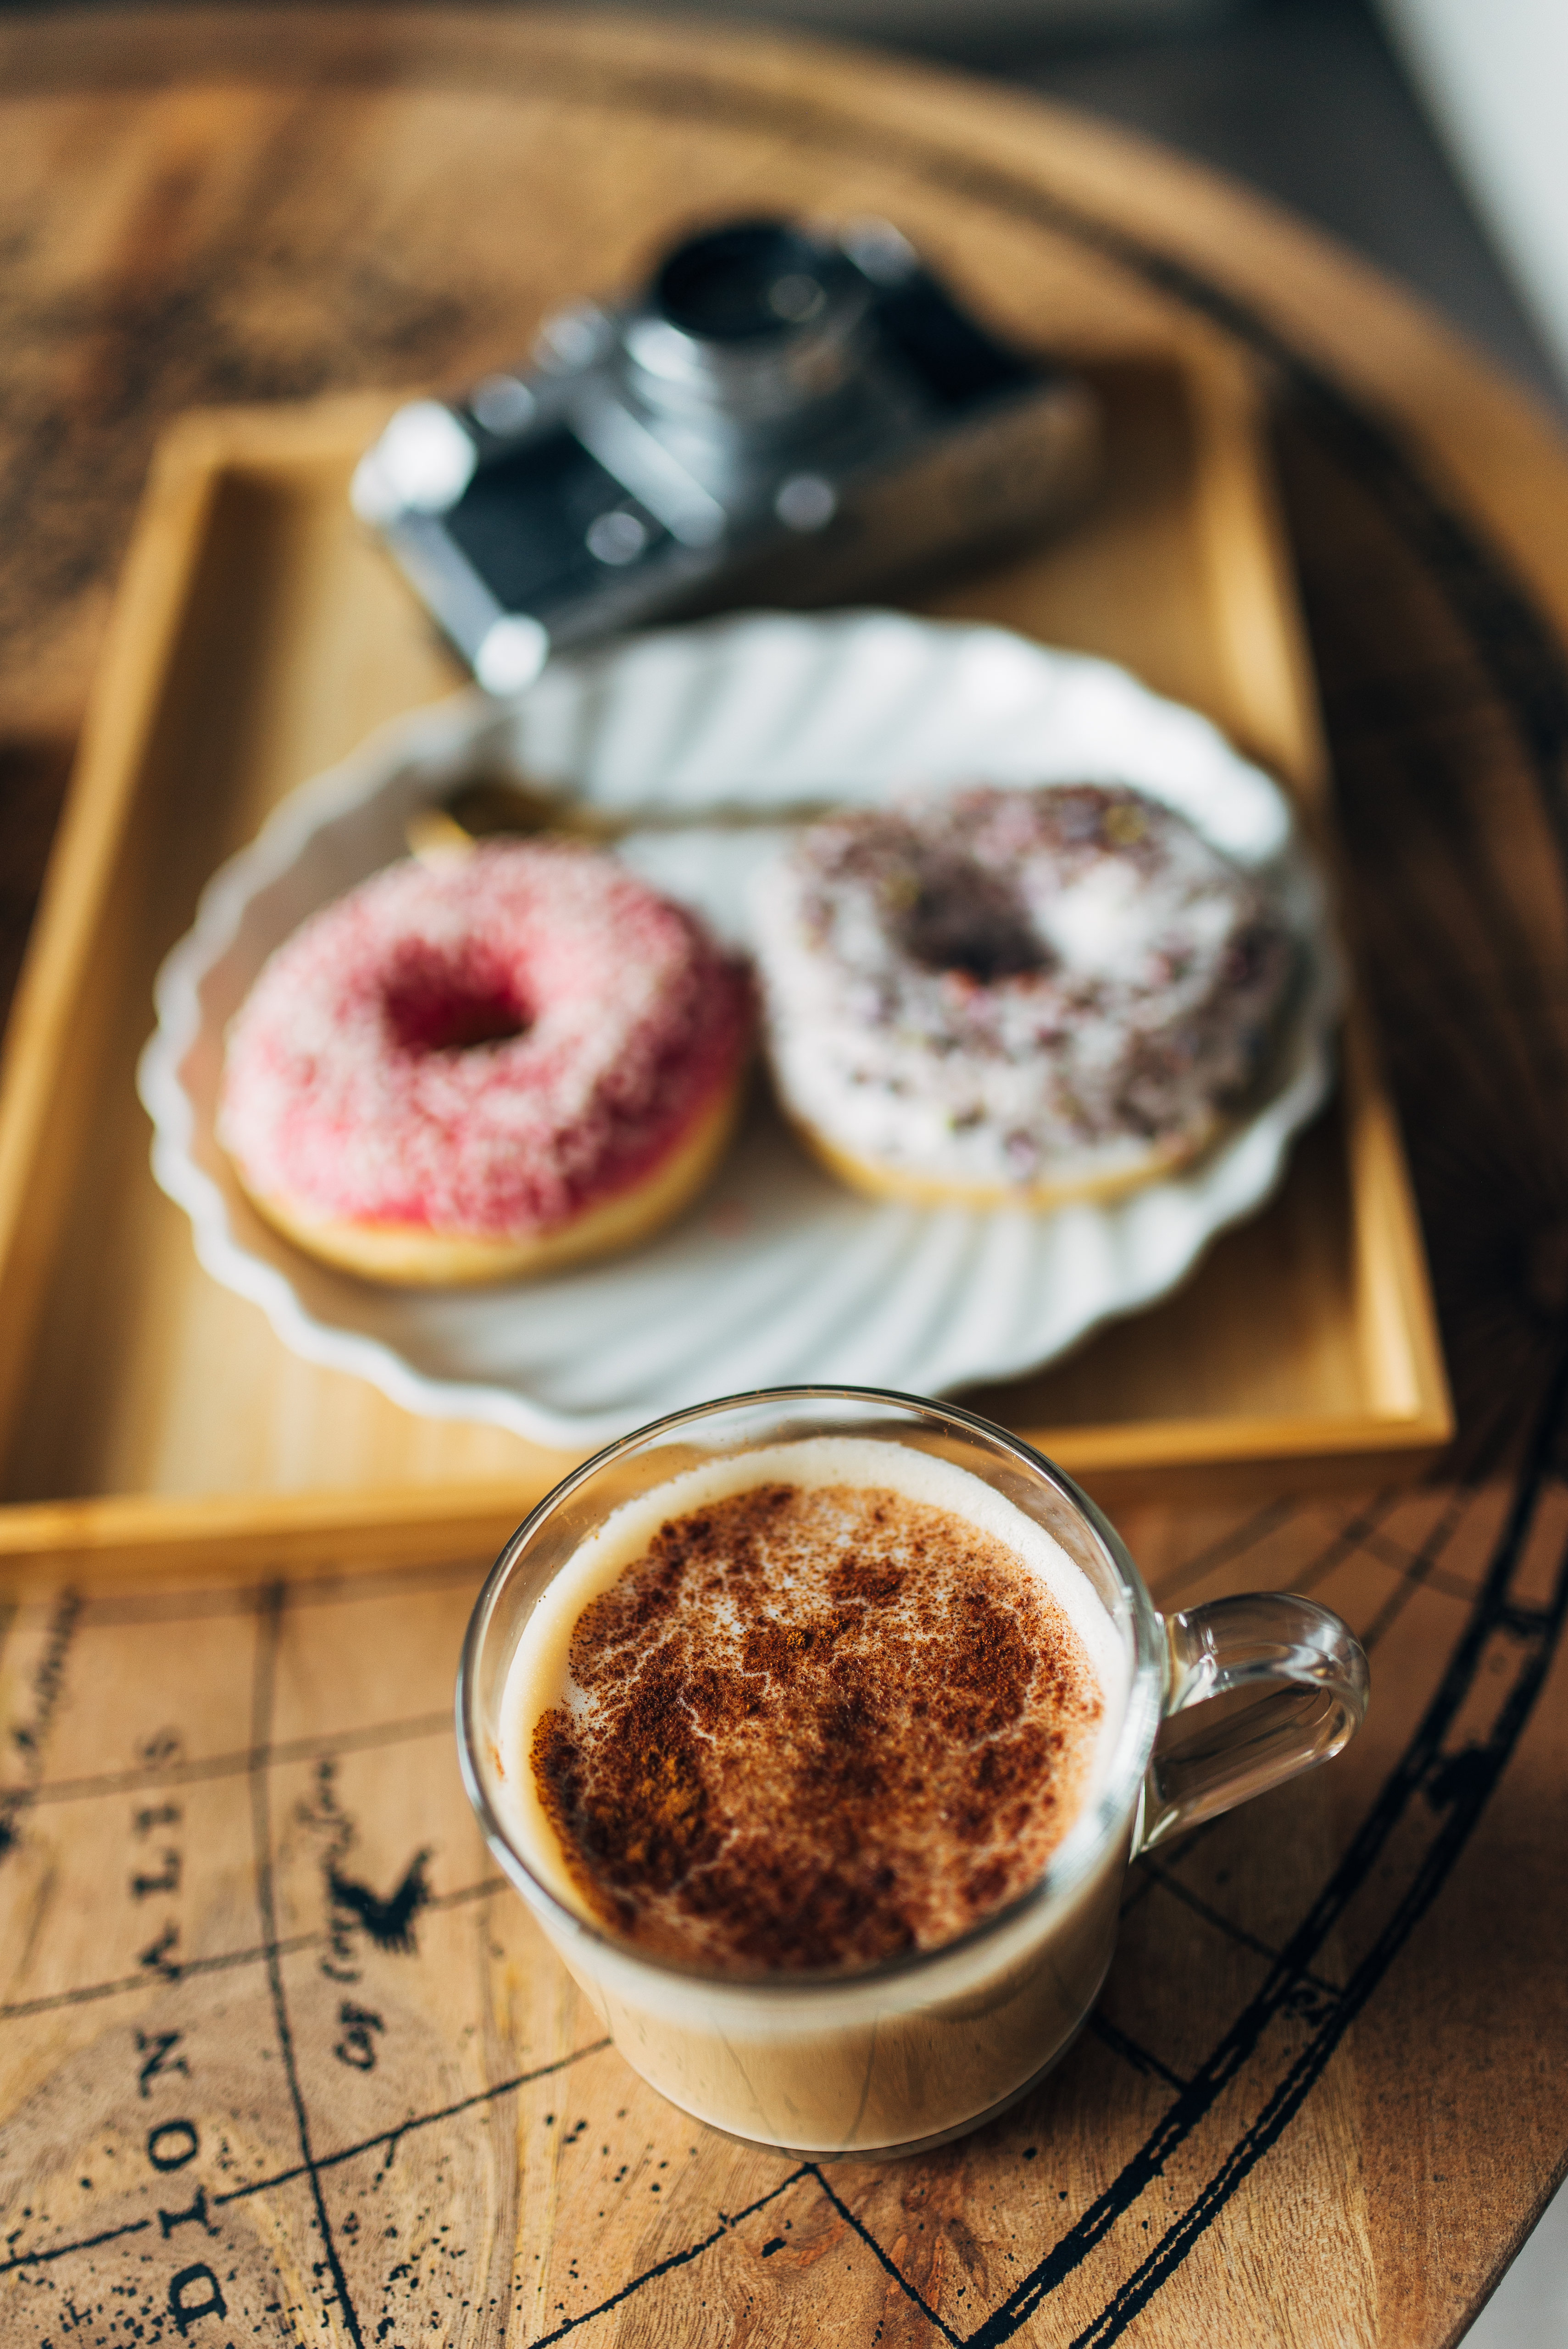 92171 download wallpaper food, coffee, cup, table, camera, donuts screensavers and pictures for free